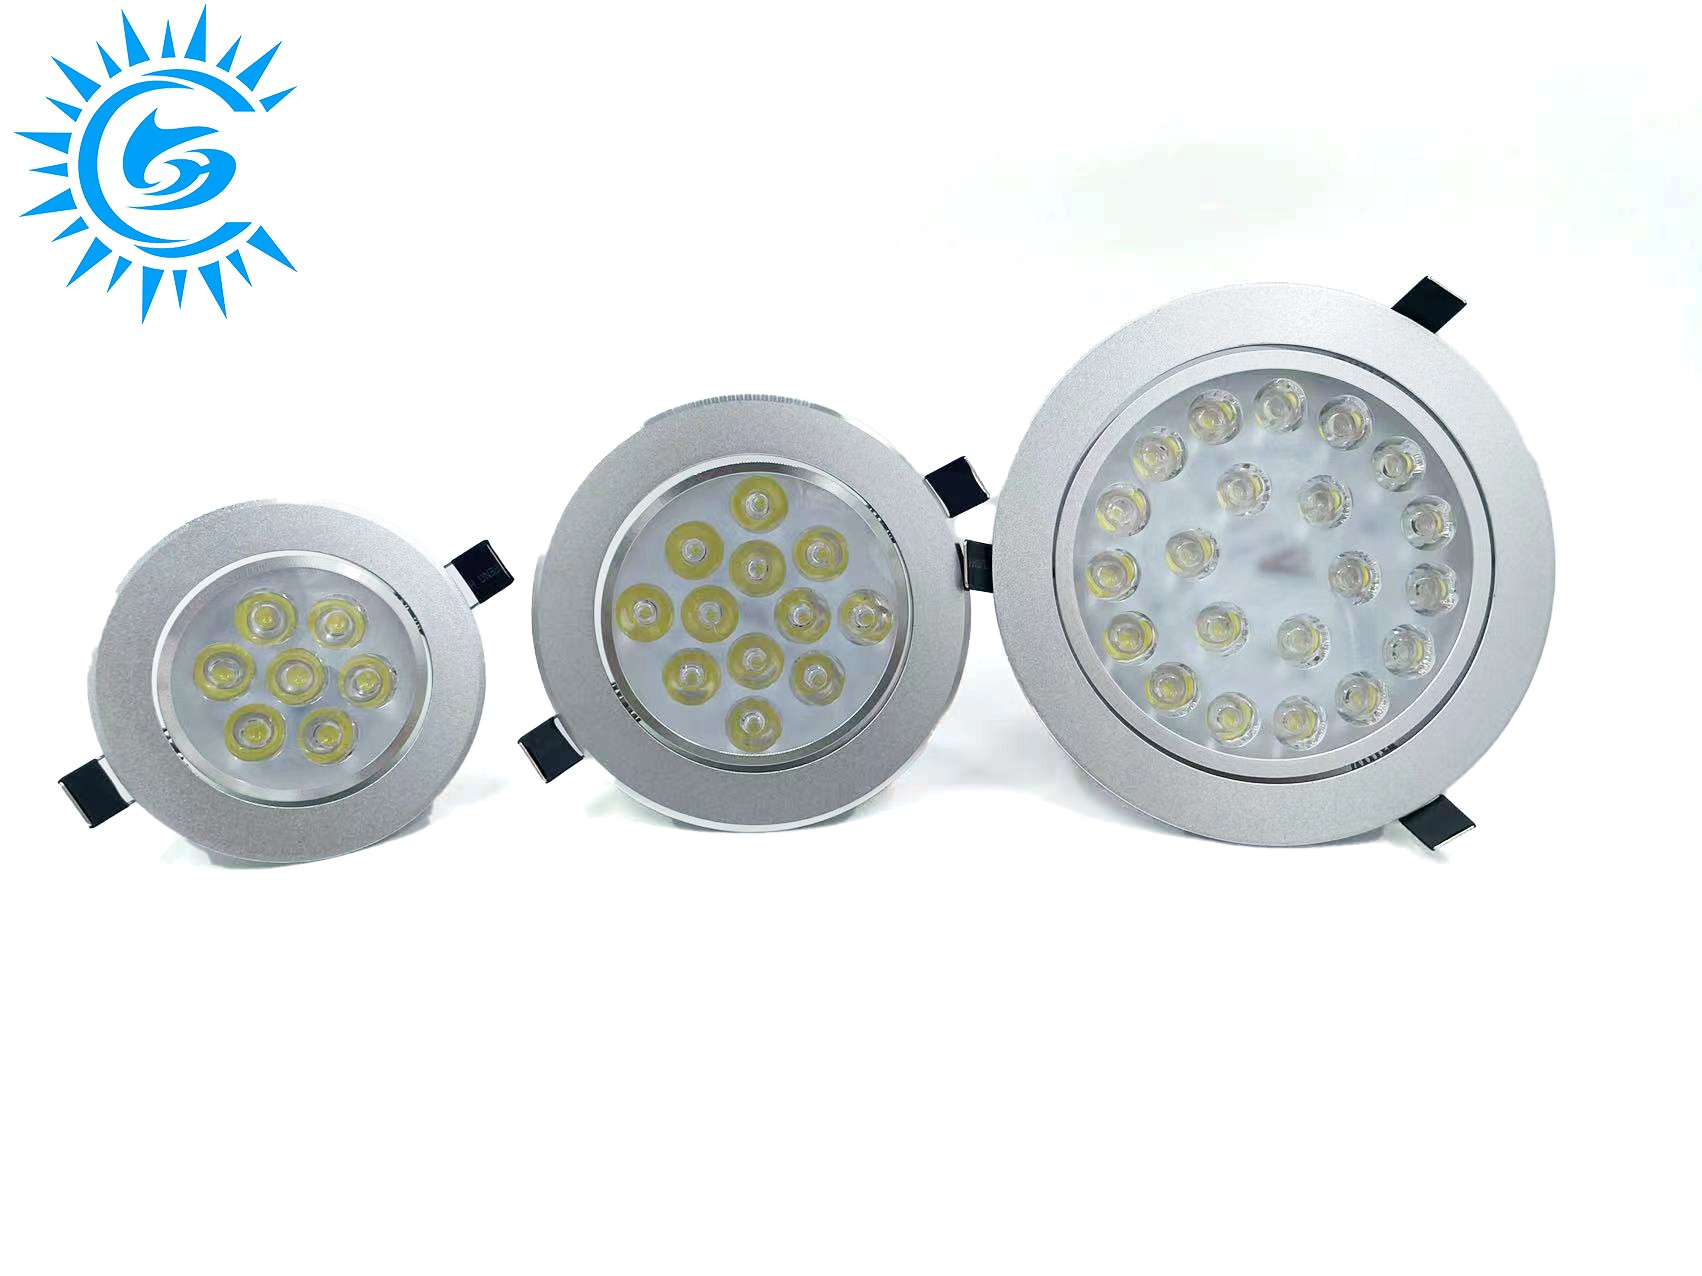 7W LED High Brightness Recessed Ceiling Downlight 85-265V with Driver led Ceiling Light